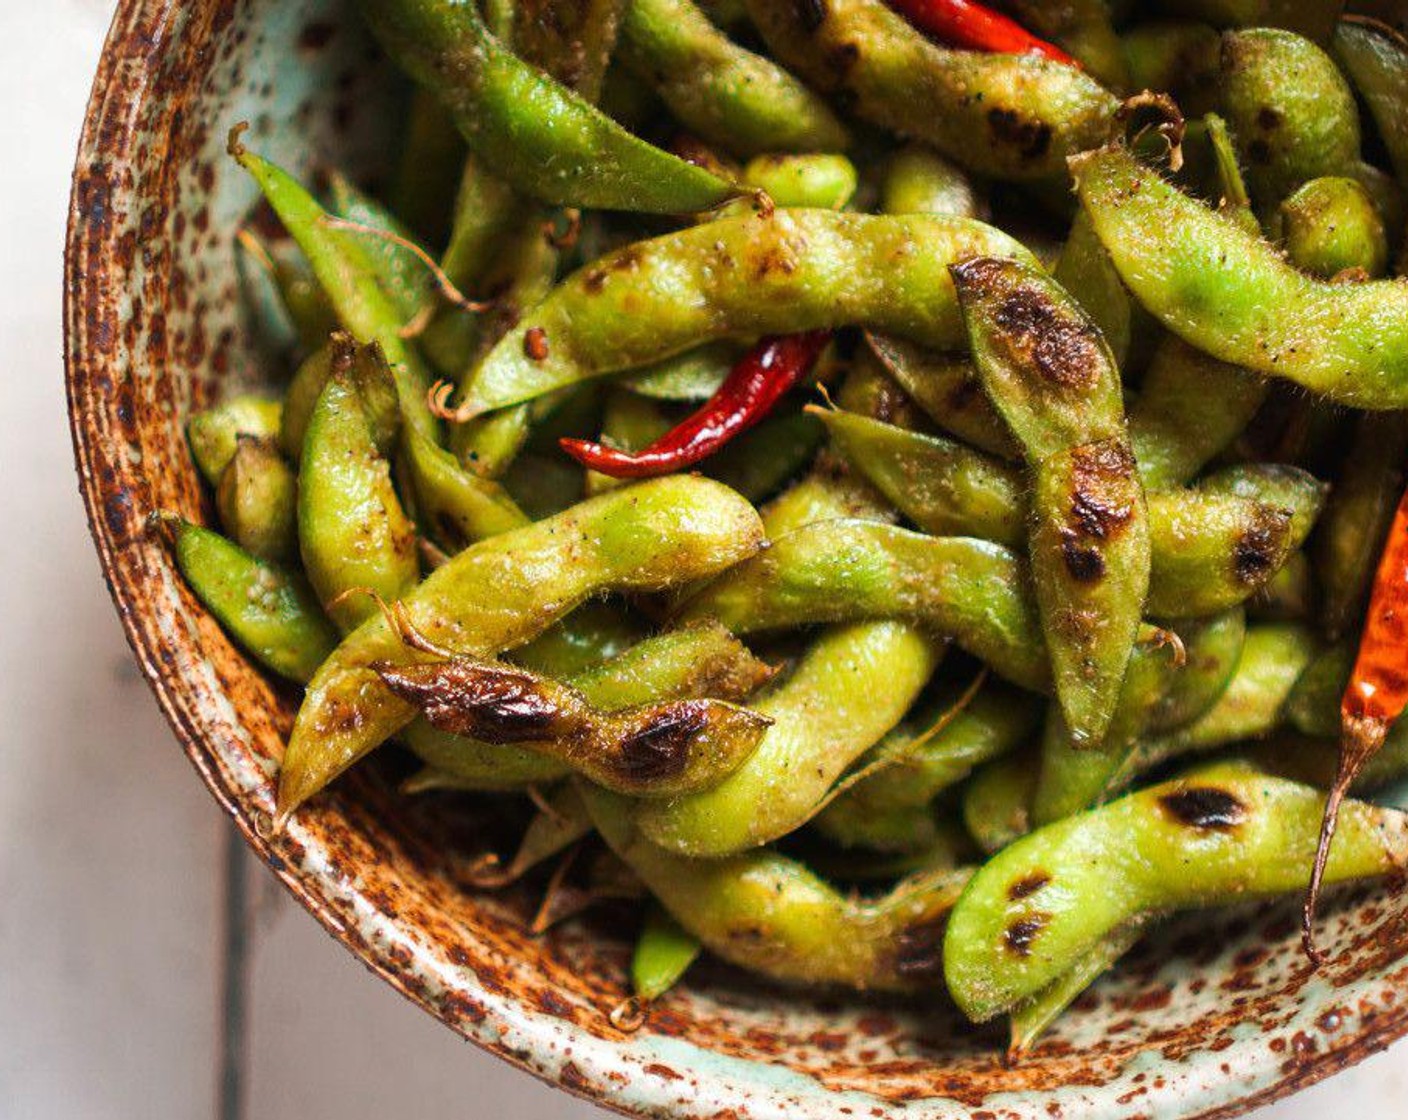 Blistered Edamame with Chili and Garlic